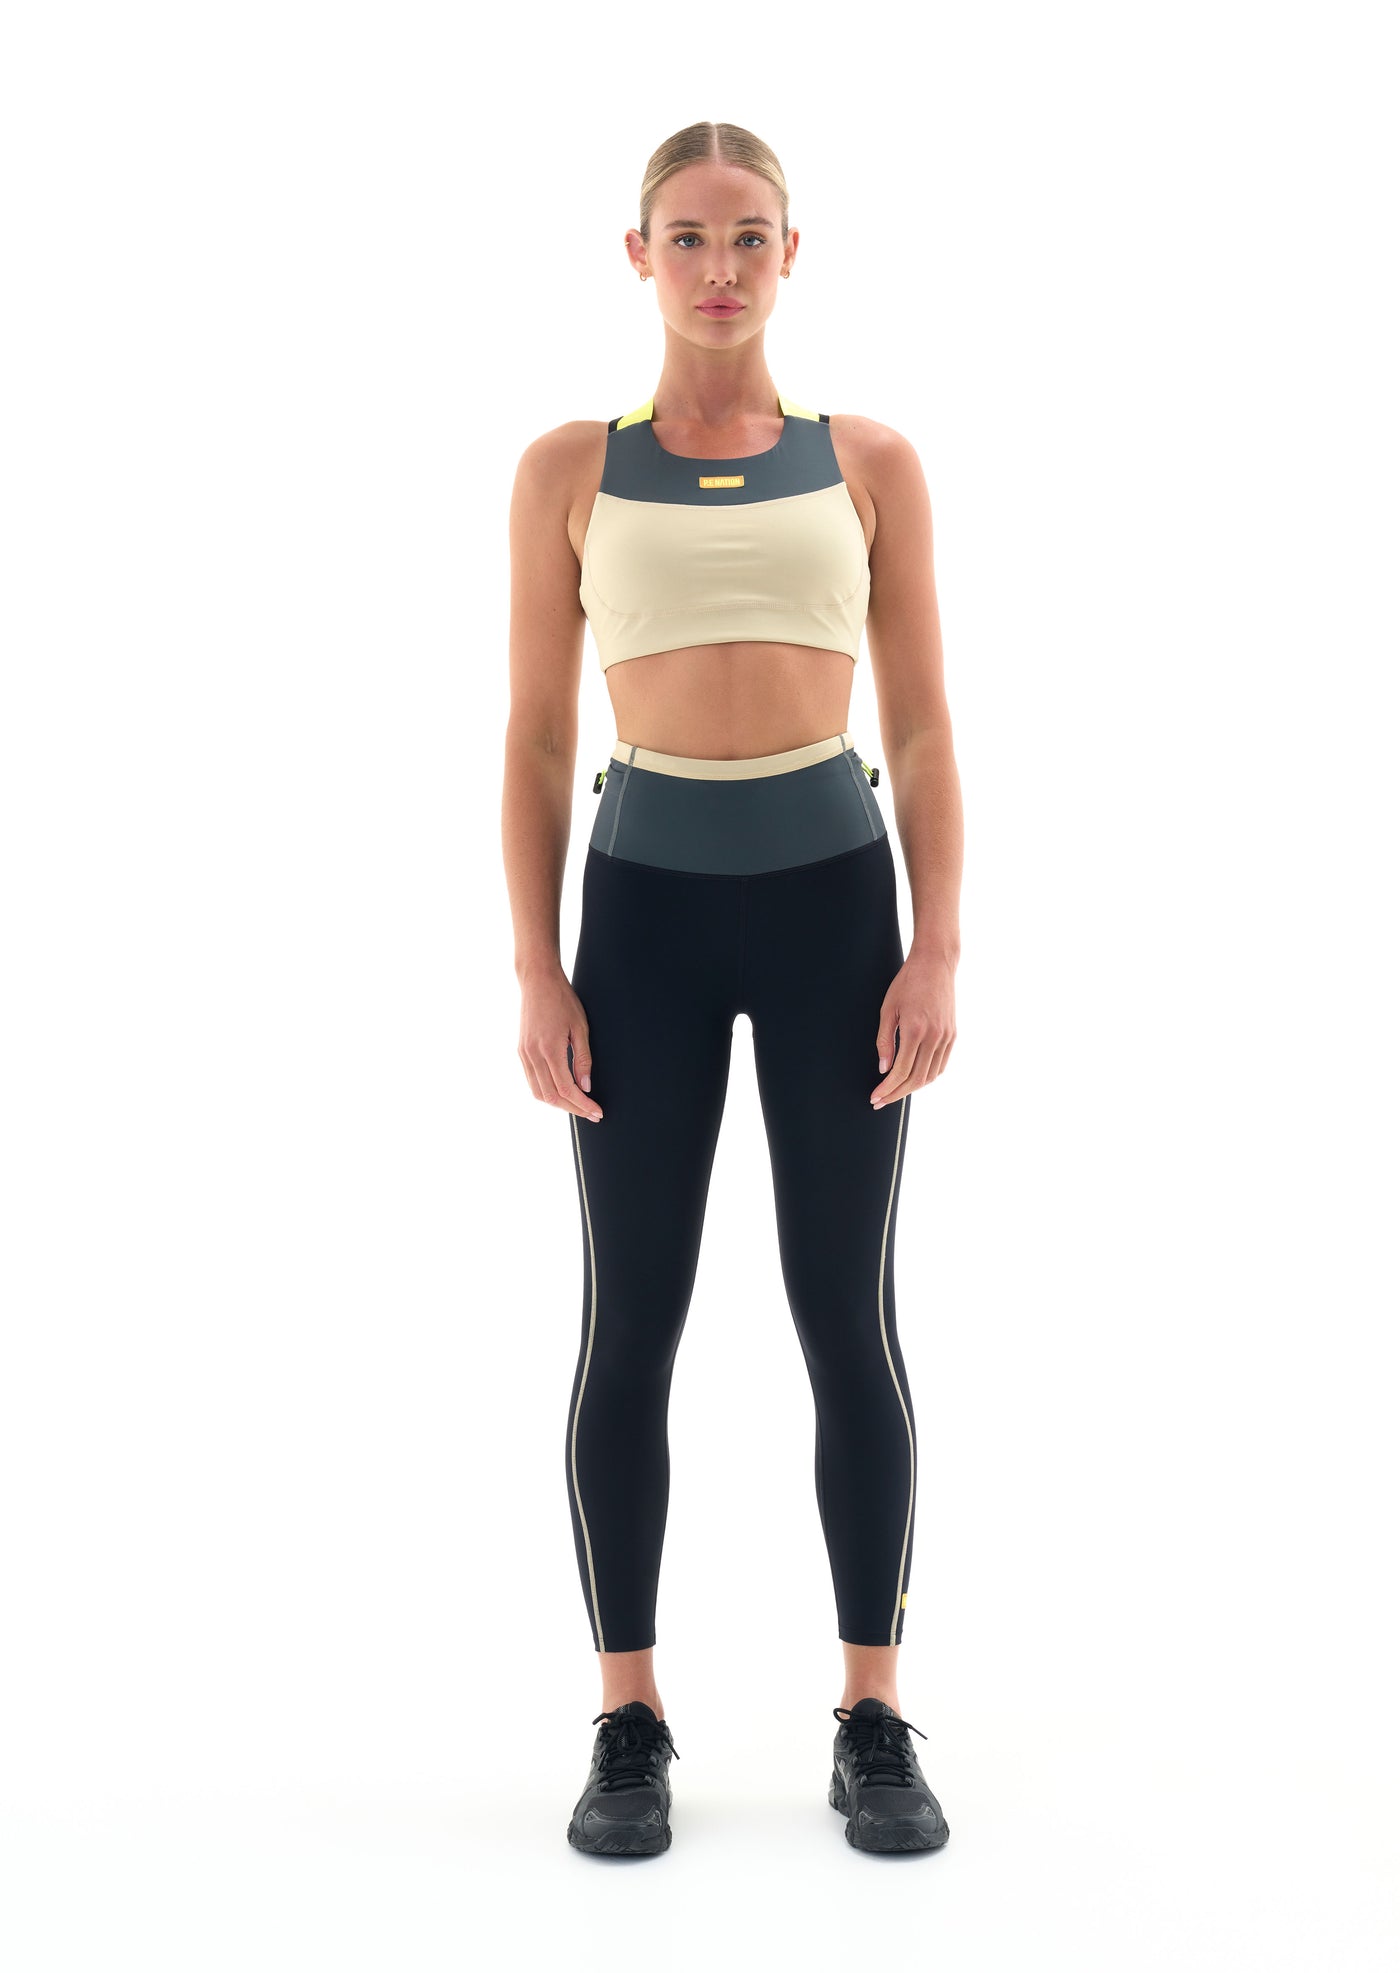 TRANSMISSION SPORTS BRA IN CHARCOAL